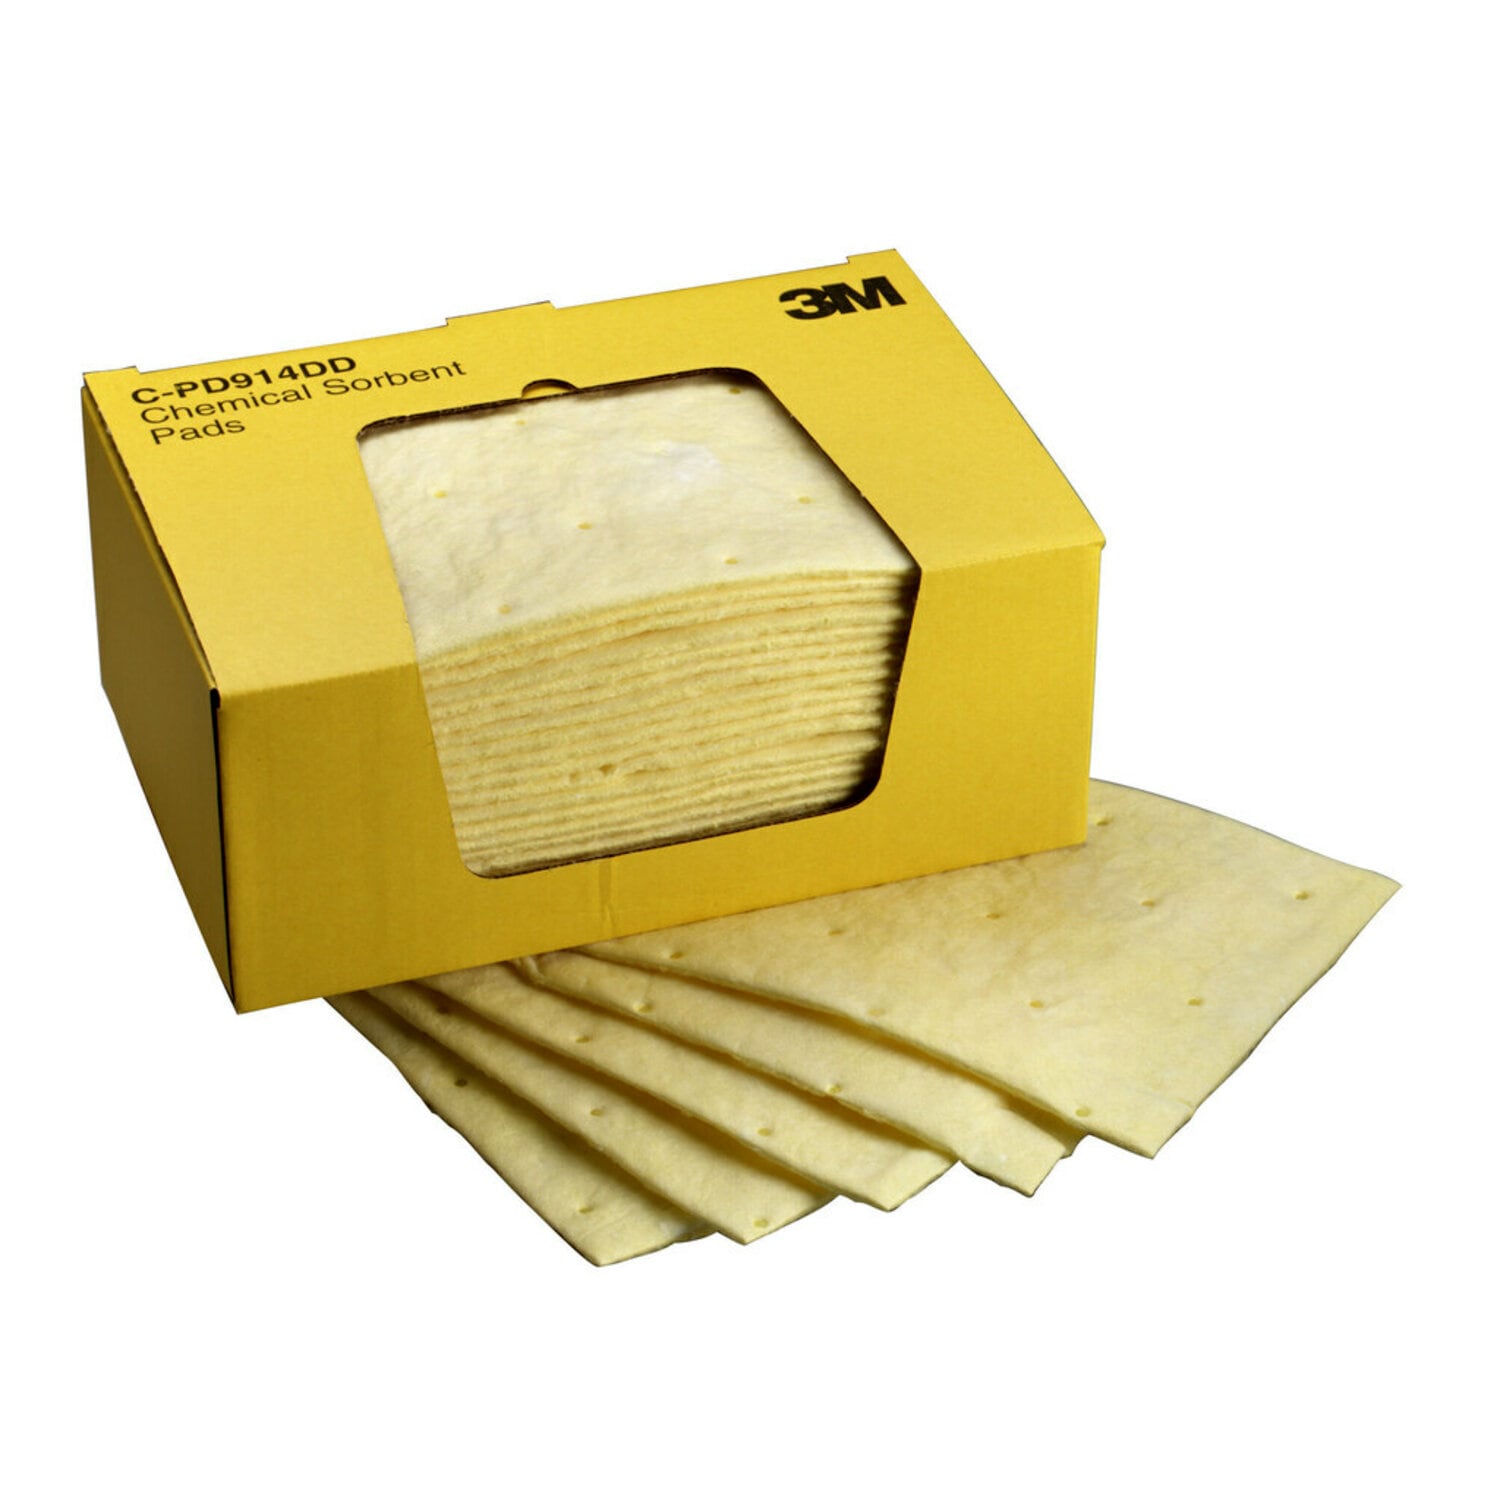 7000001947 - 3M Chemical Sorbent Pad C-PD914DD, High Capacity, 9 in x 14 in, 25
Pads/Box, 6 Box/Case